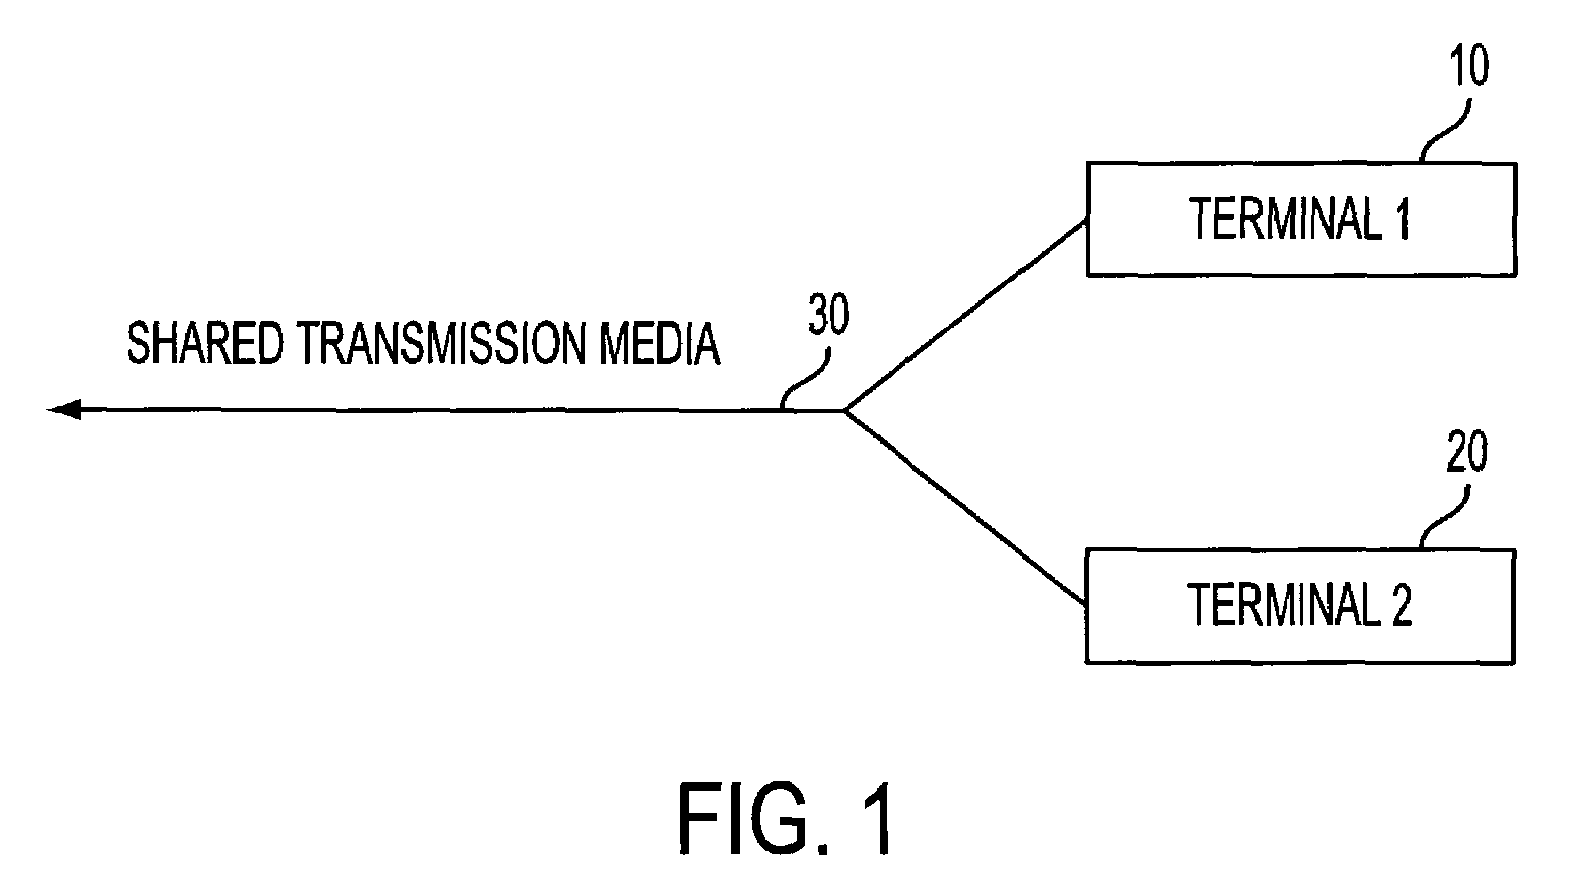 Reducing the access delay for transmitting processed data over transmission data